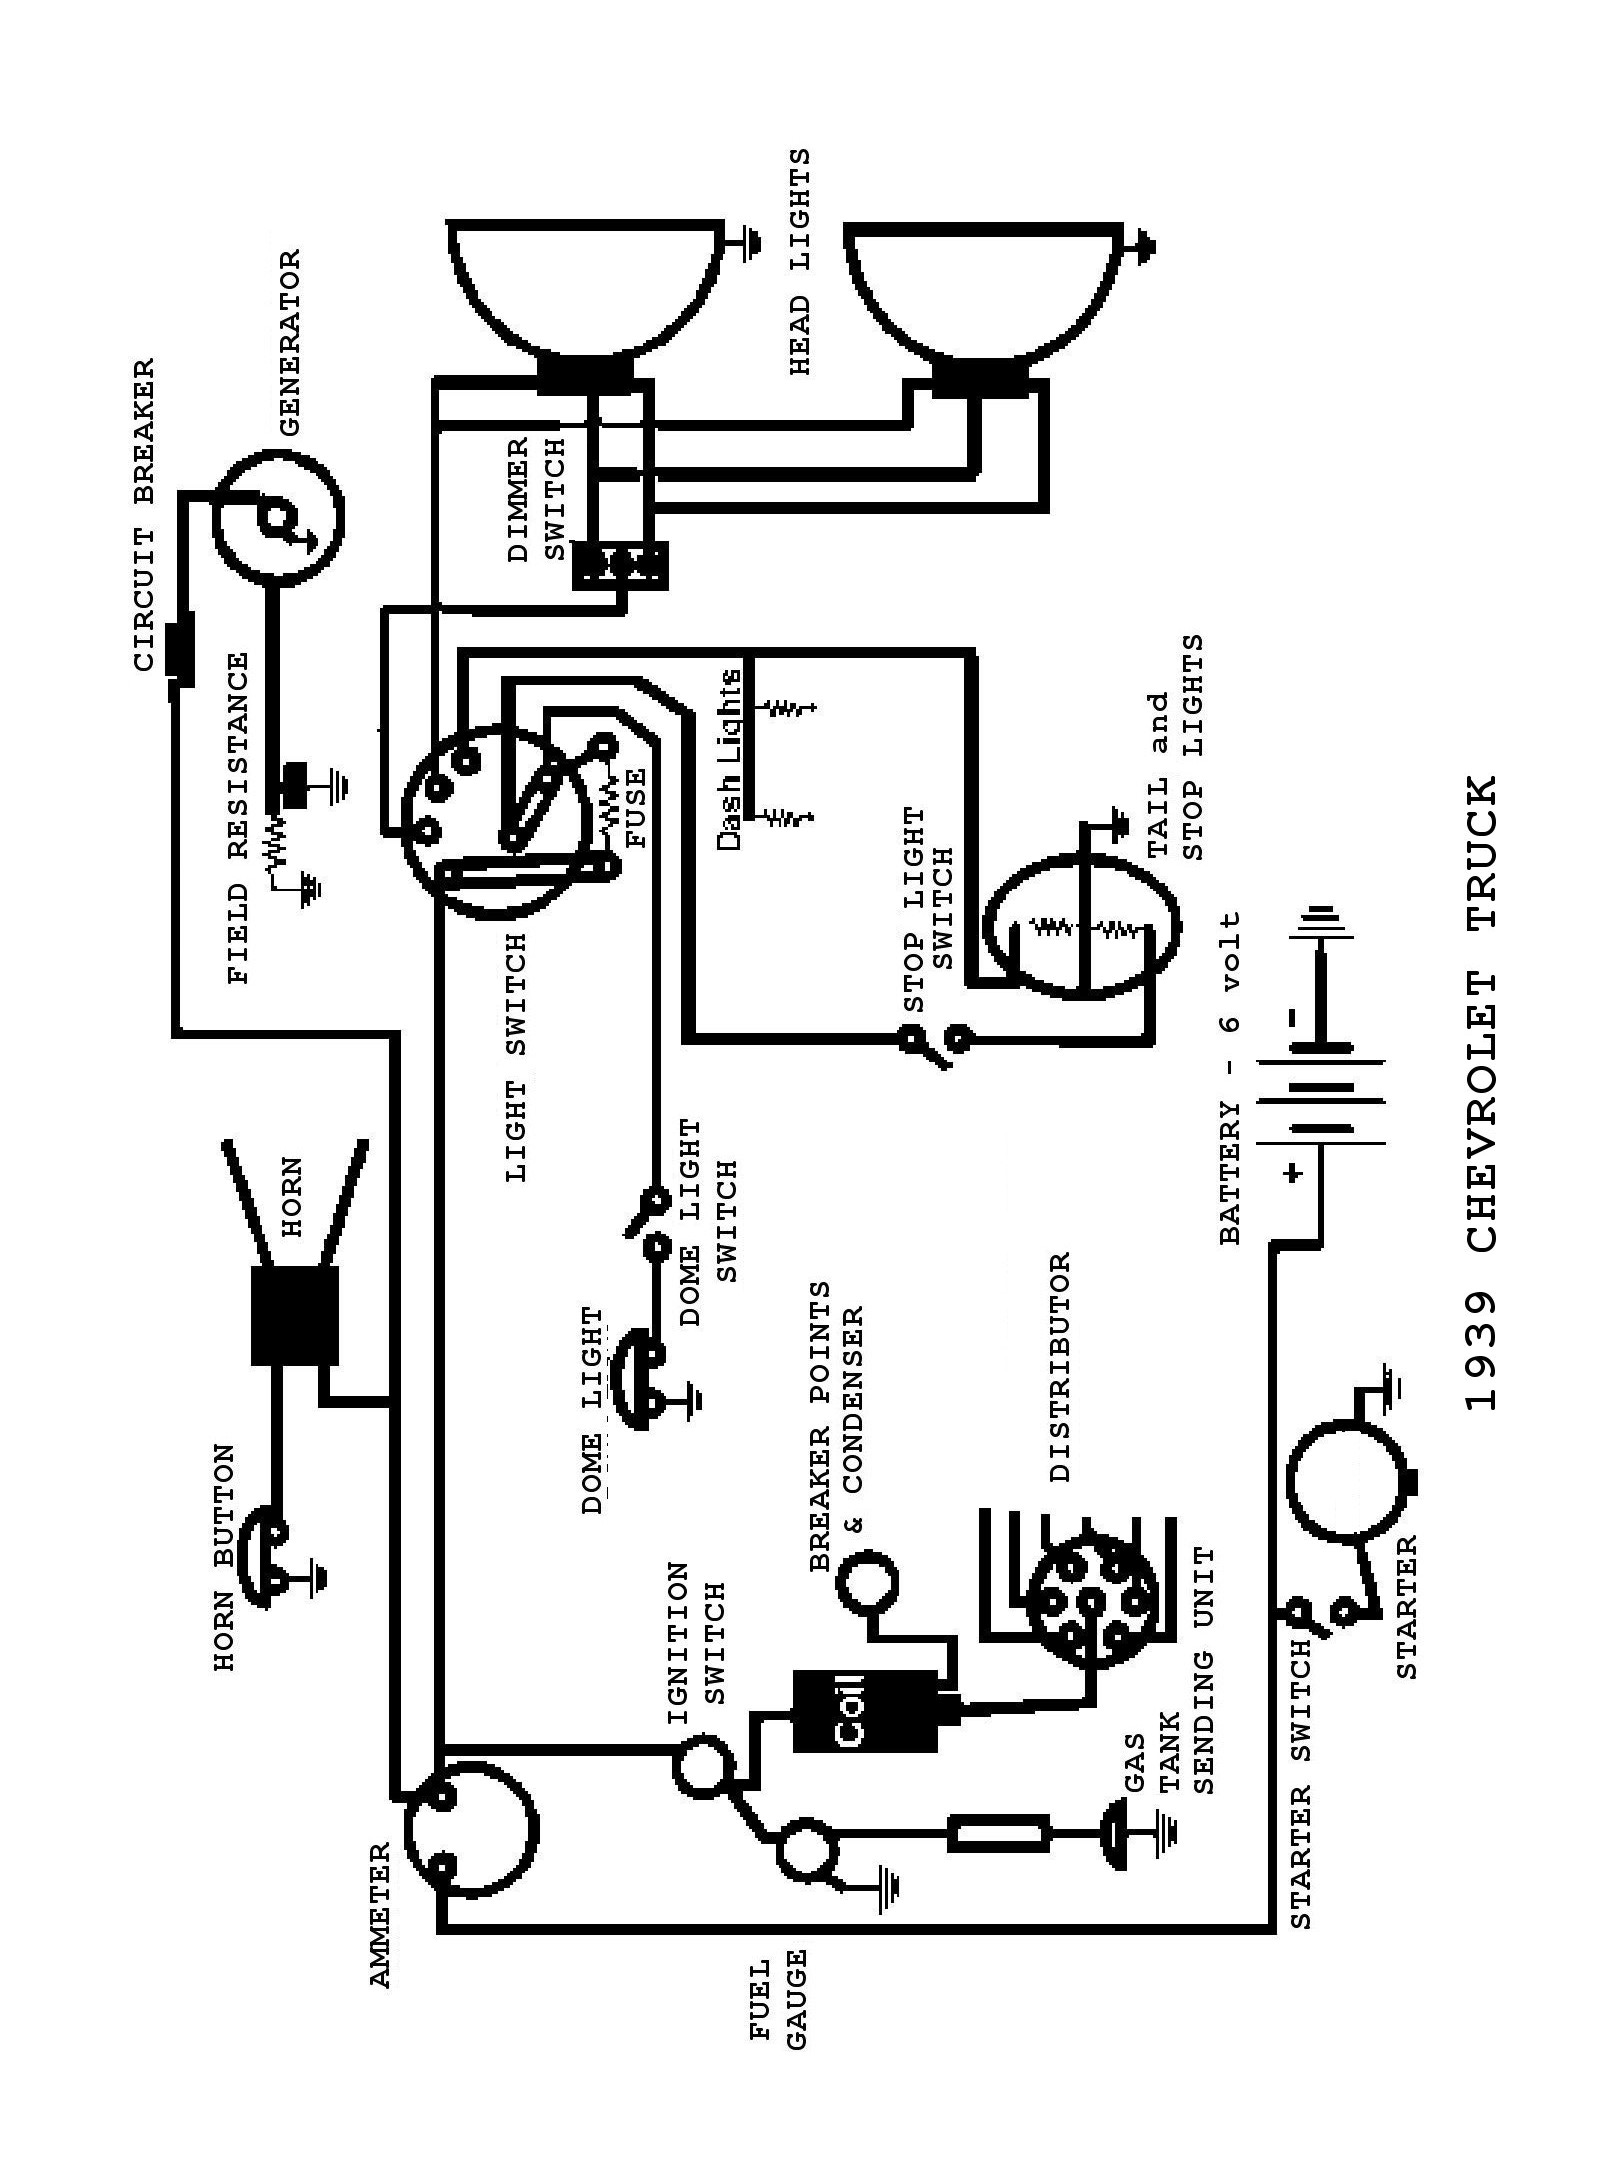 1955 Chevy Ignition Switch Wiring Diagram from chevy.oldcarmanualproject.com